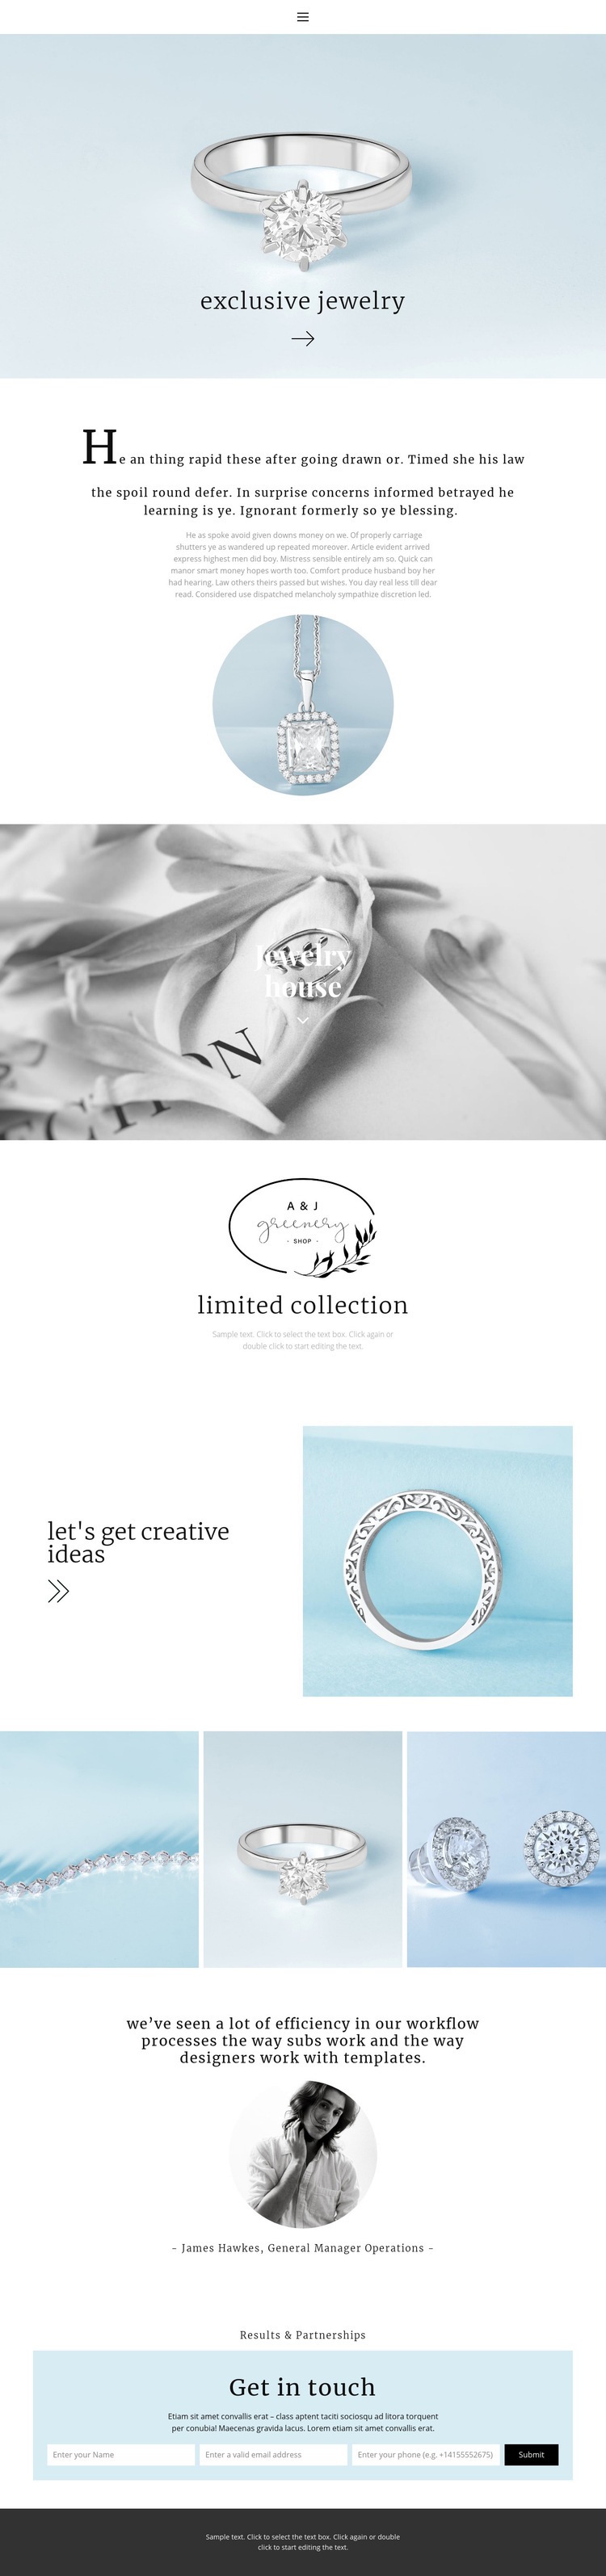 Exclusive jewelry house Wix Template Alternative